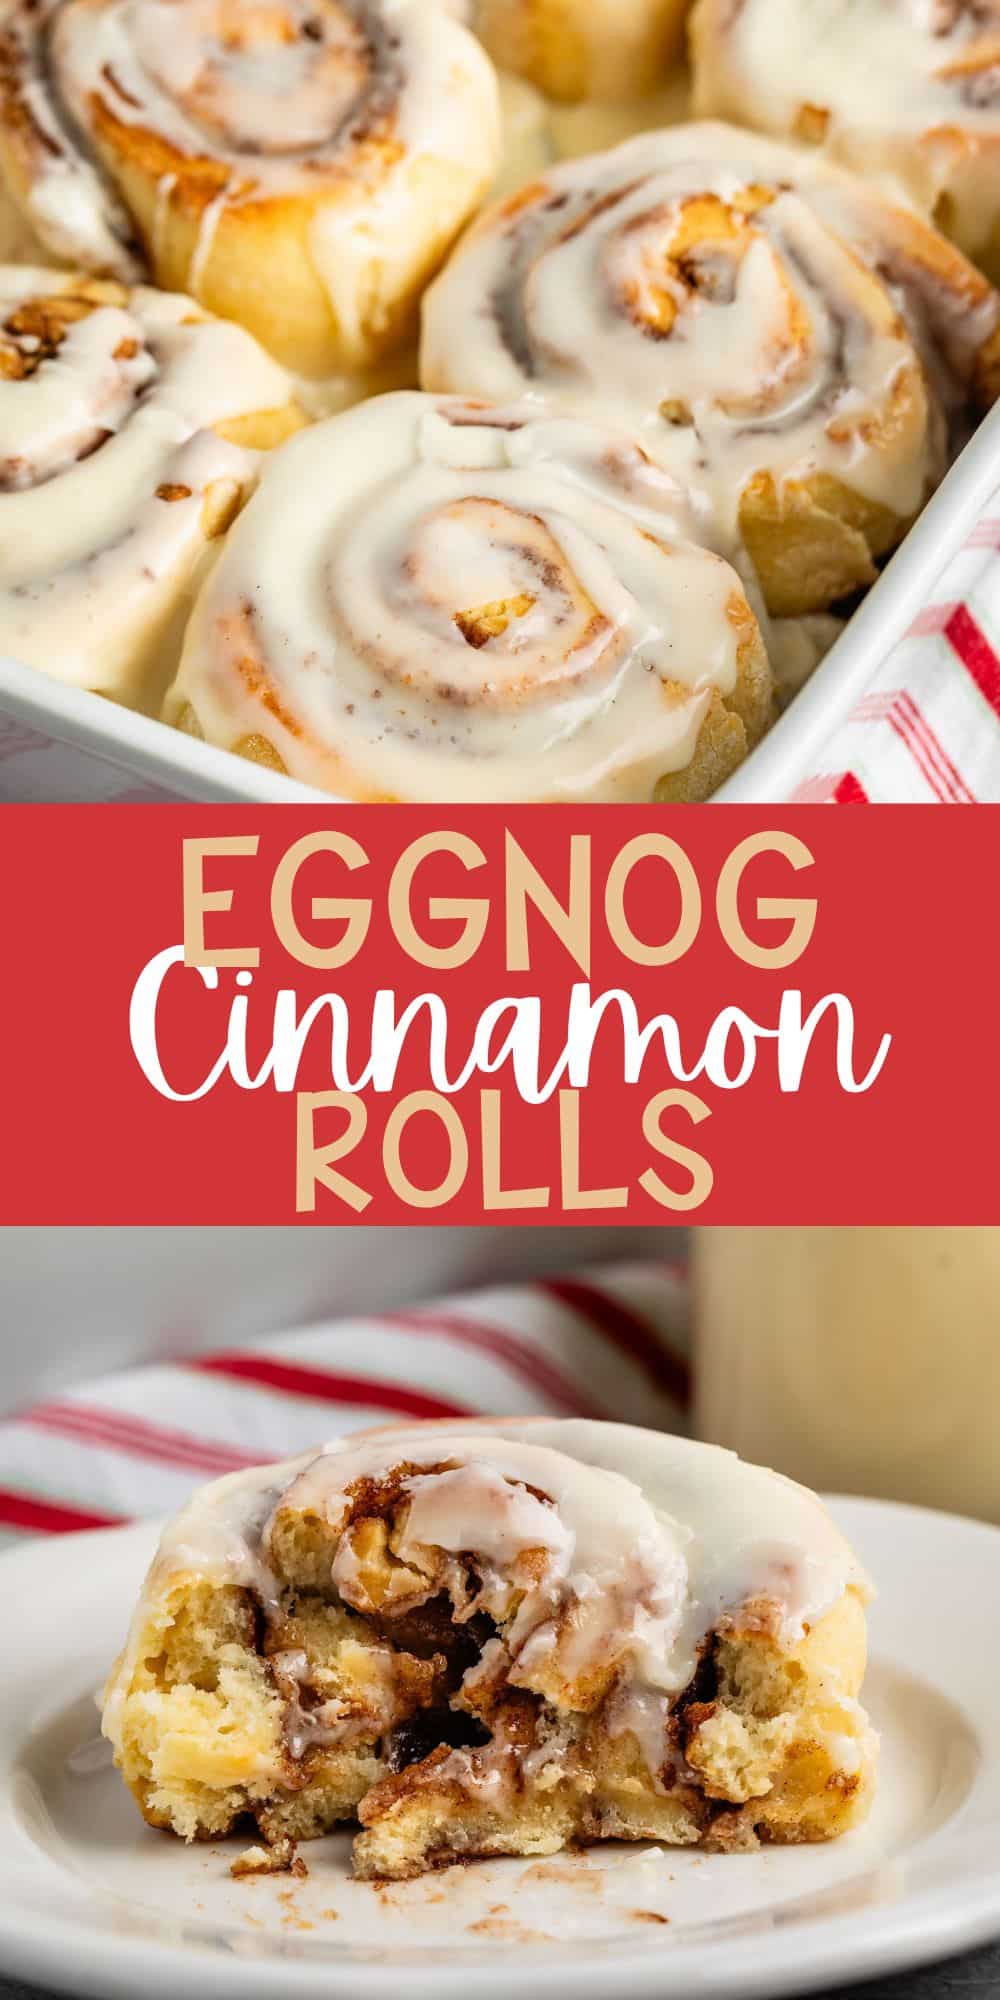 two photos of cinnamon rolls laid together in a white dish with icing on top with words on the image.